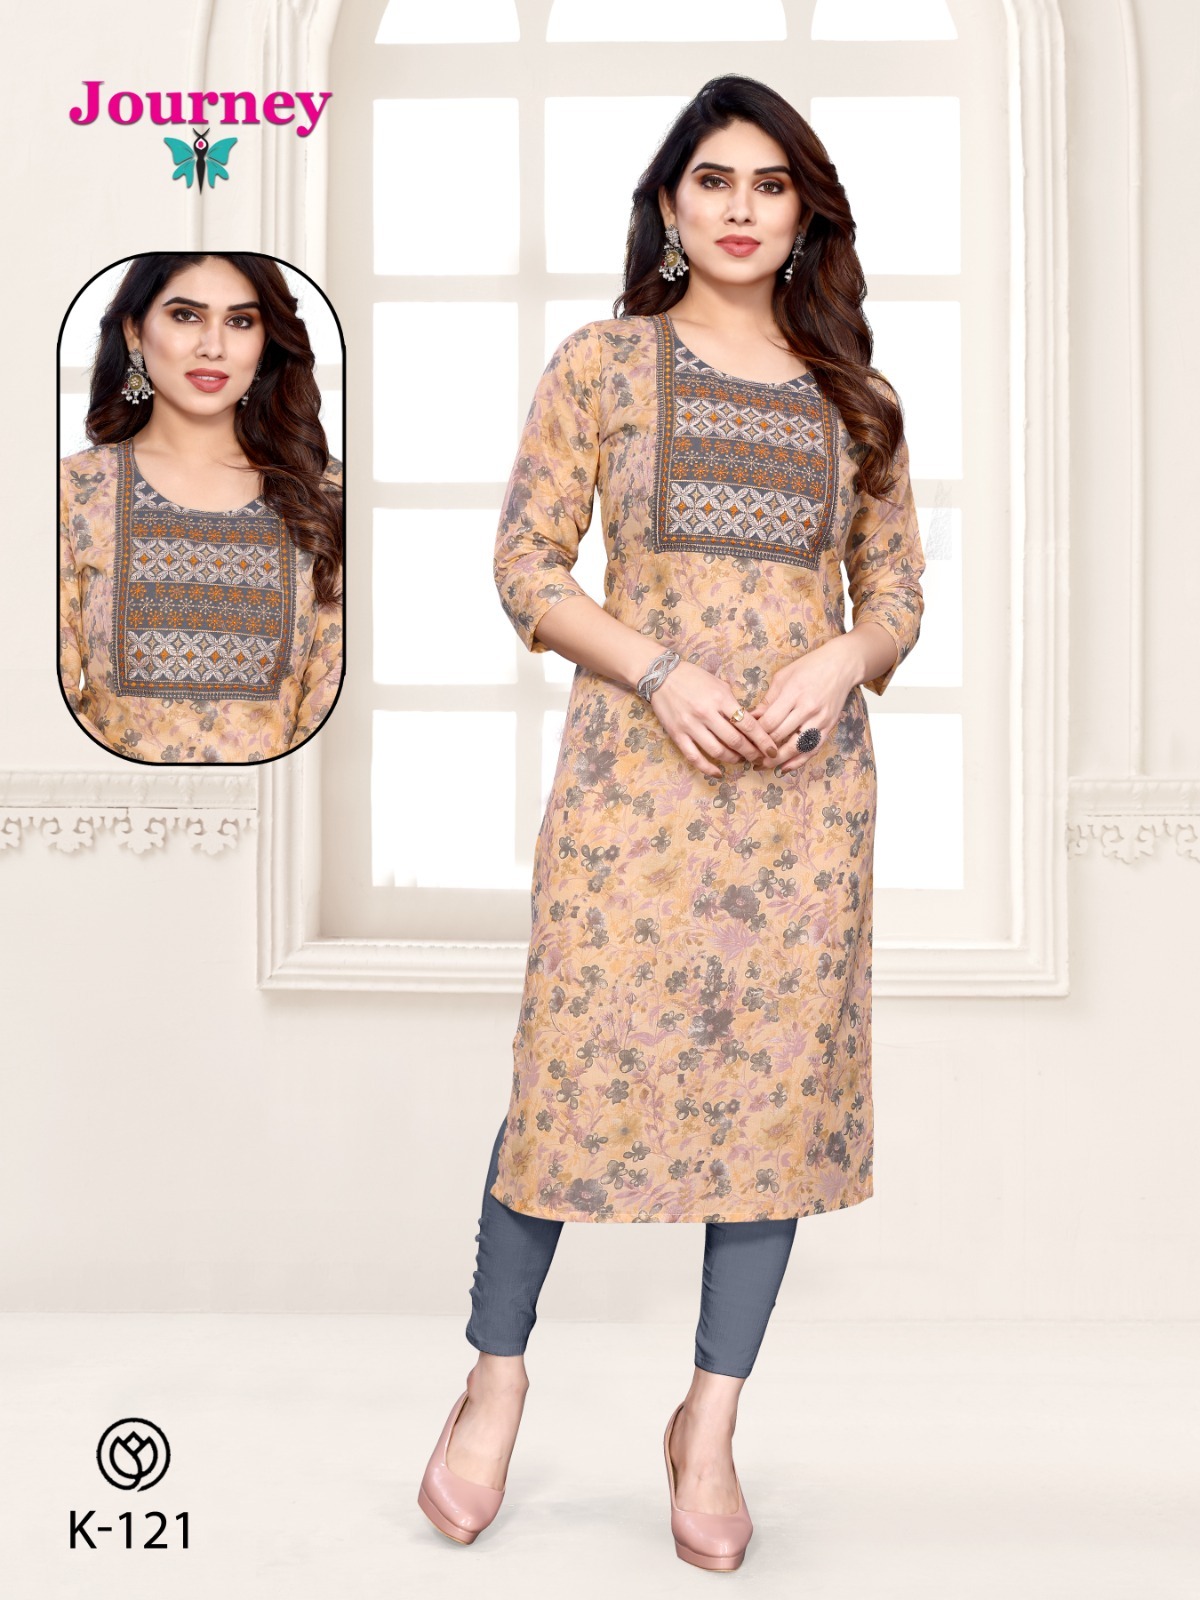 Plazo Suit - Buy Plazo Suits Online at Myntra